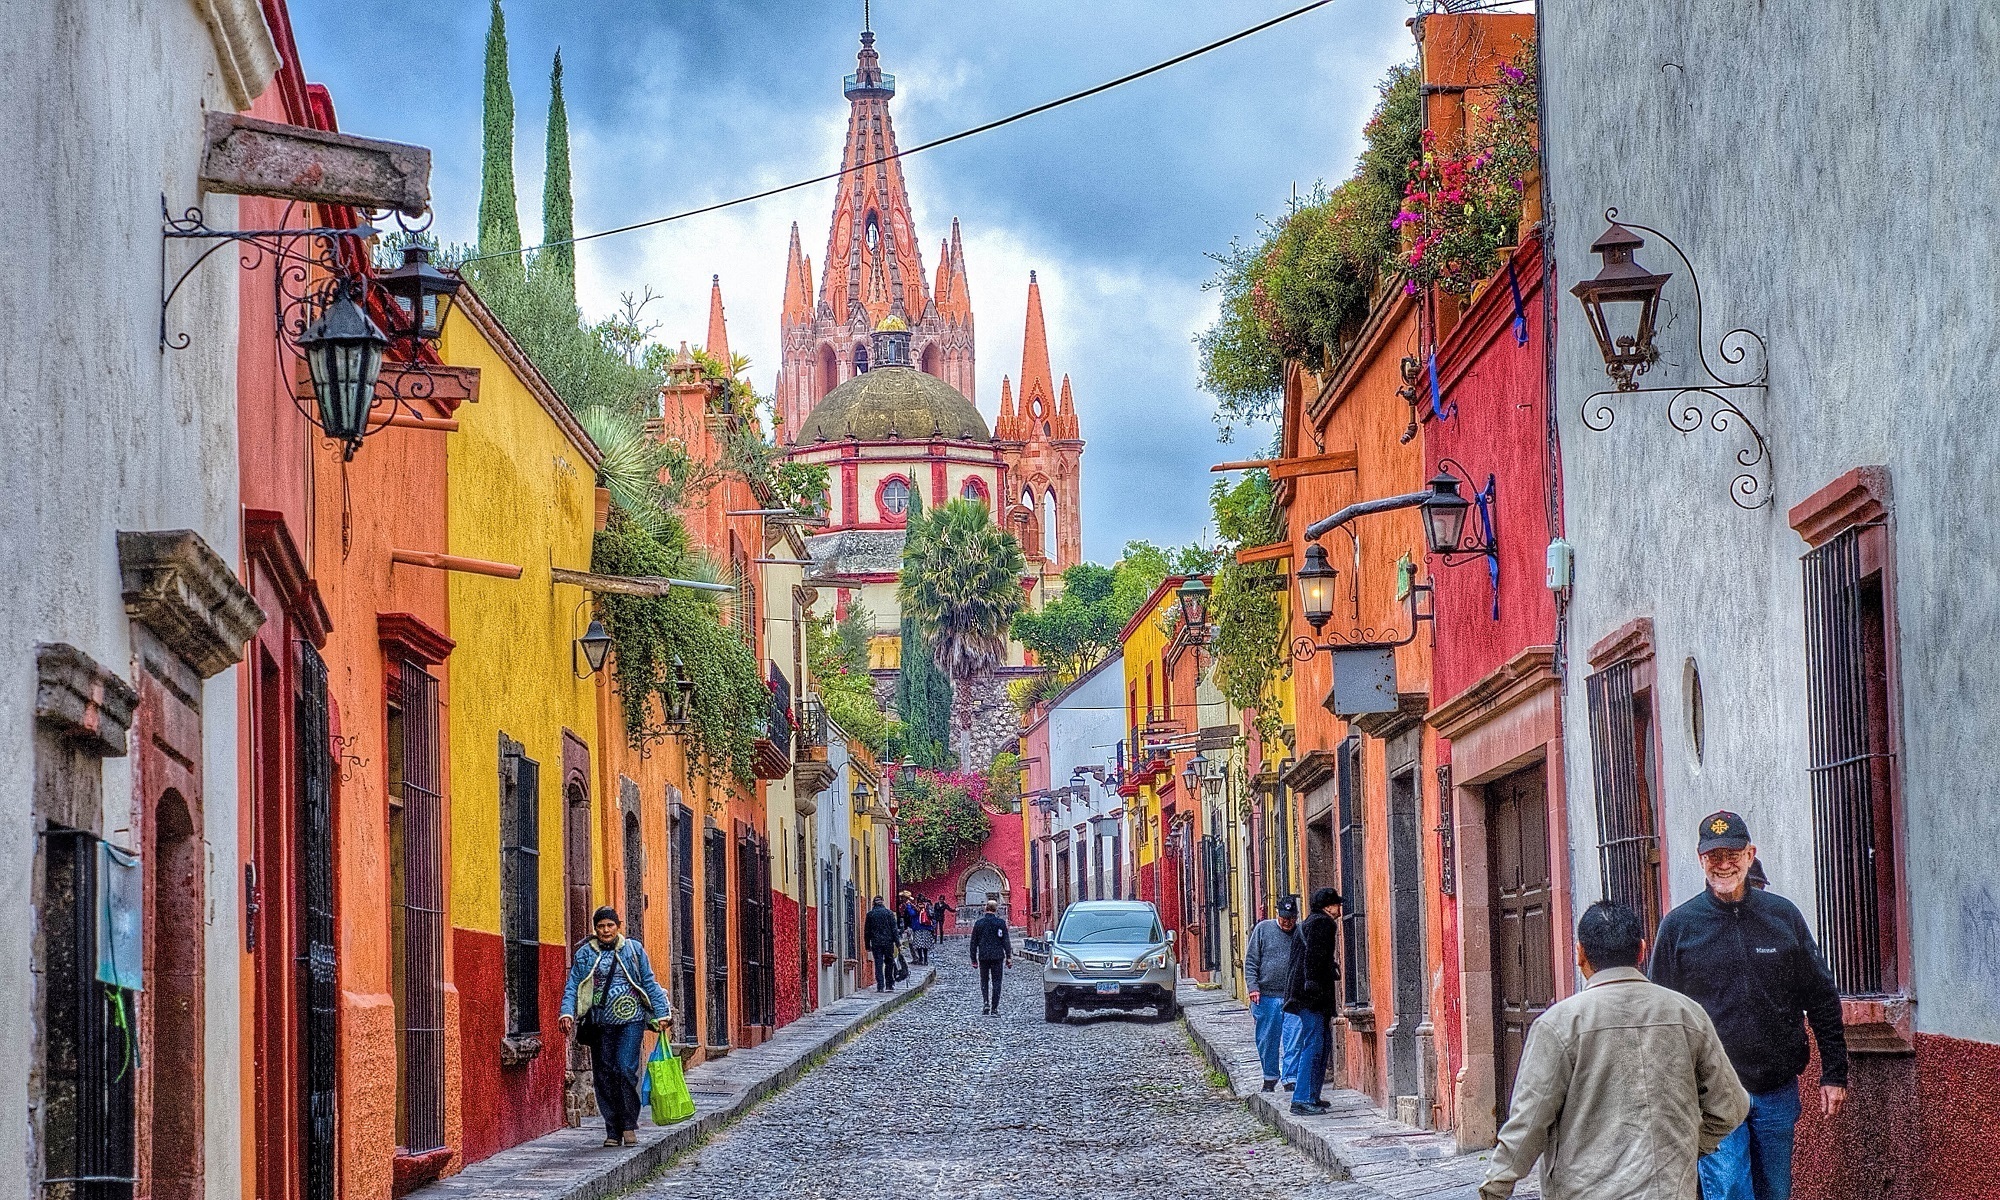 Language and Culture in Mexico